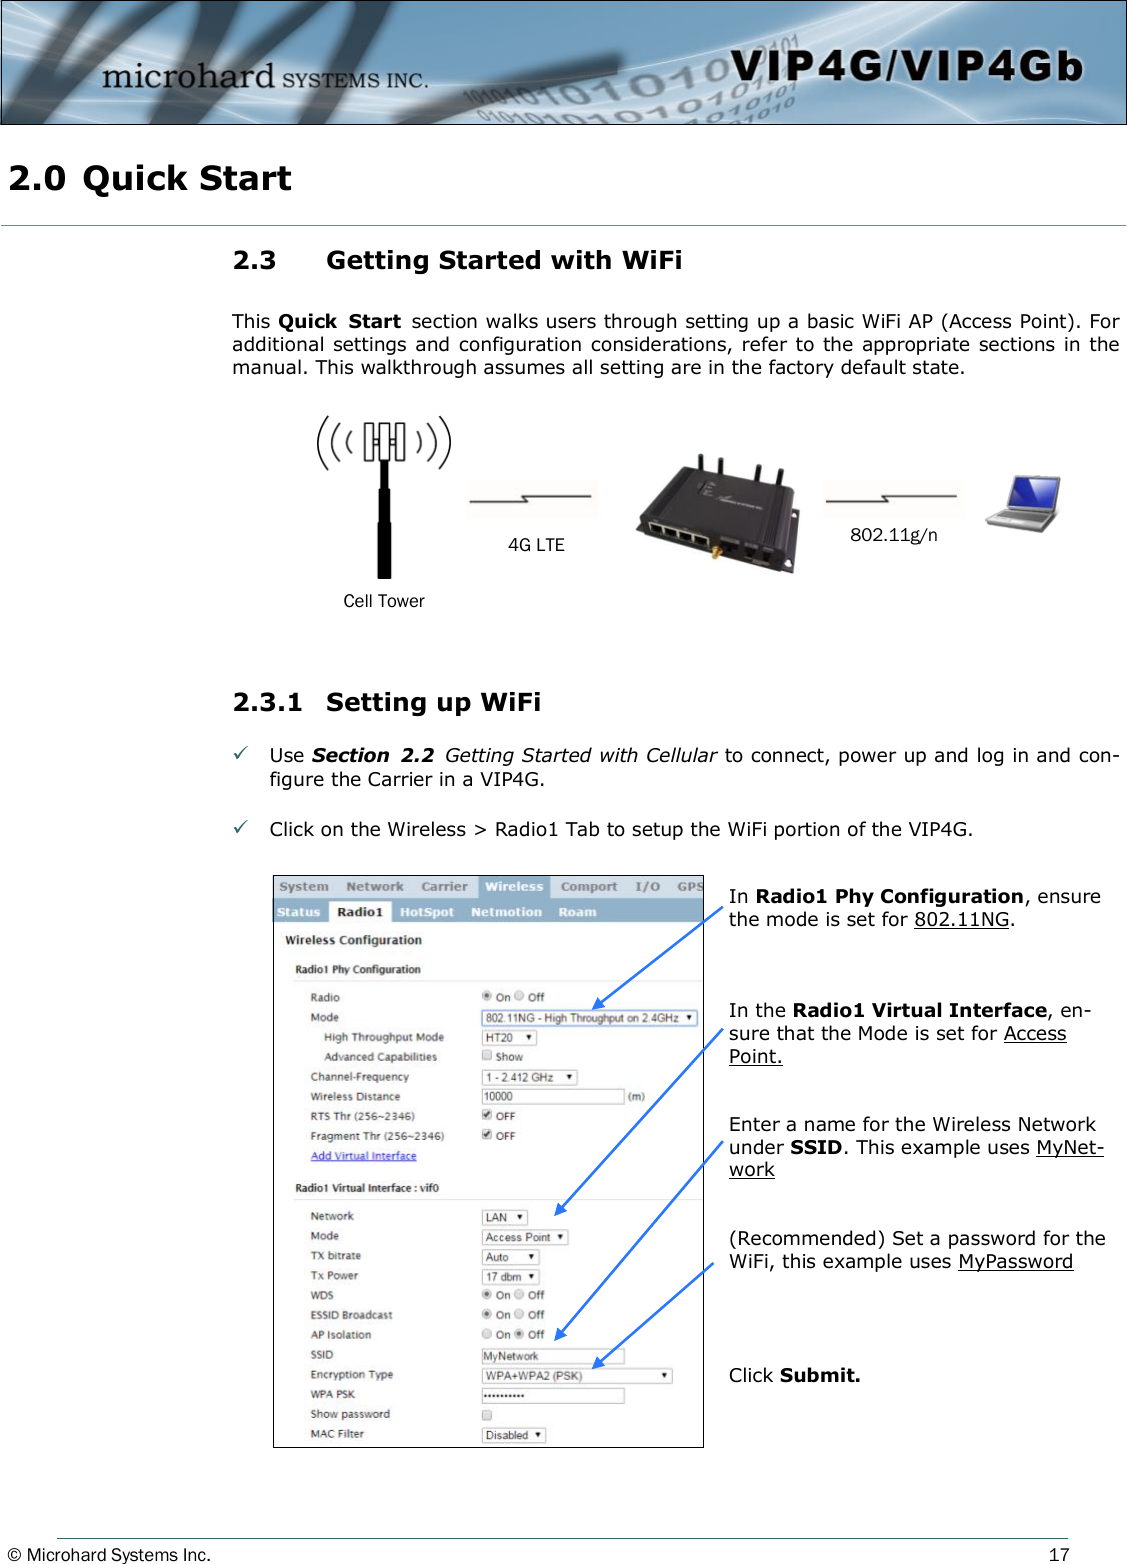 © Microhard Systems Inc.          17 2.3    Getting Started with WiFi   This Quick  Start  section walks users through setting up a basic WiFi AP (Access Point). For additional settings and configuration considerations, refer to the appropriate sections in the manual. This walkthrough assumes all setting are in the factory default state.             2.3.1  Setting up WiFi   Use Section  2.2  Getting Started with Cellular to connect, power up and log in and con-figure the Carrier in a VIP4G.    Click on the Wireless &gt; Radio1 Tab to setup the WiFi portion of the VIP4G.  Cell Tower 2.0 Quick Start  4G LTE  802.11g/n In Radio1 Phy Configuration, ensure the mode is set for 802.11NG.    In the Radio1 Virtual Interface, en-sure that the Mode is set for Access Point.   Enter a name for the Wireless Network under SSID. This example uses MyNet-work   (Recommended) Set a password for the WiFi, this example uses MyPassword     Click Submit. 